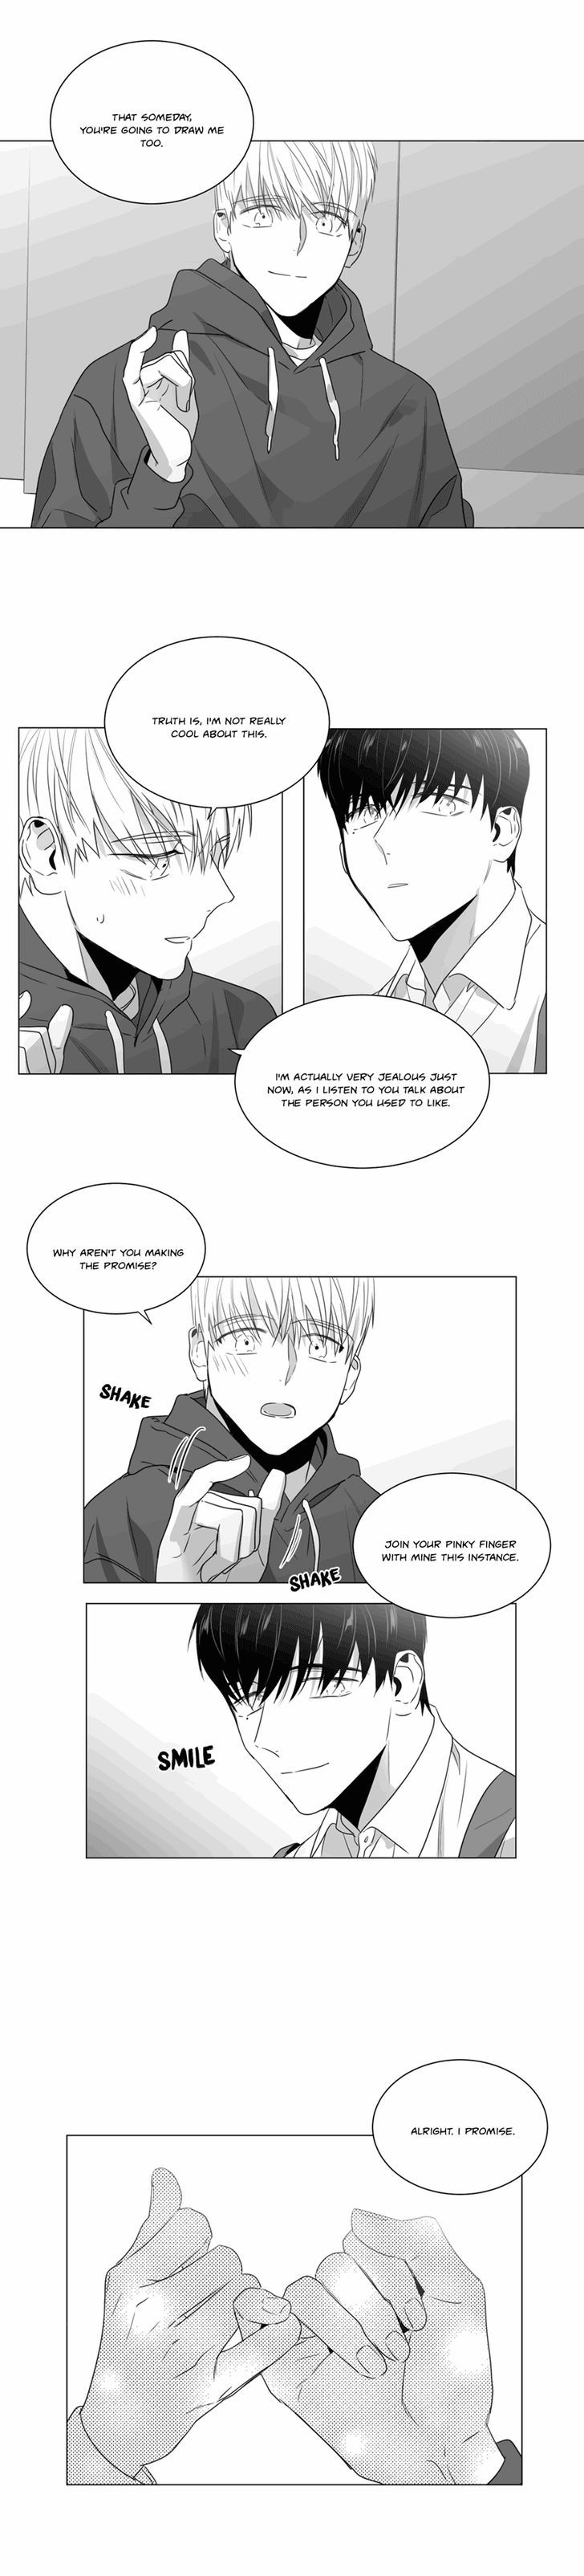 Lover Boy (Lezhin) Chapter 035 page 16